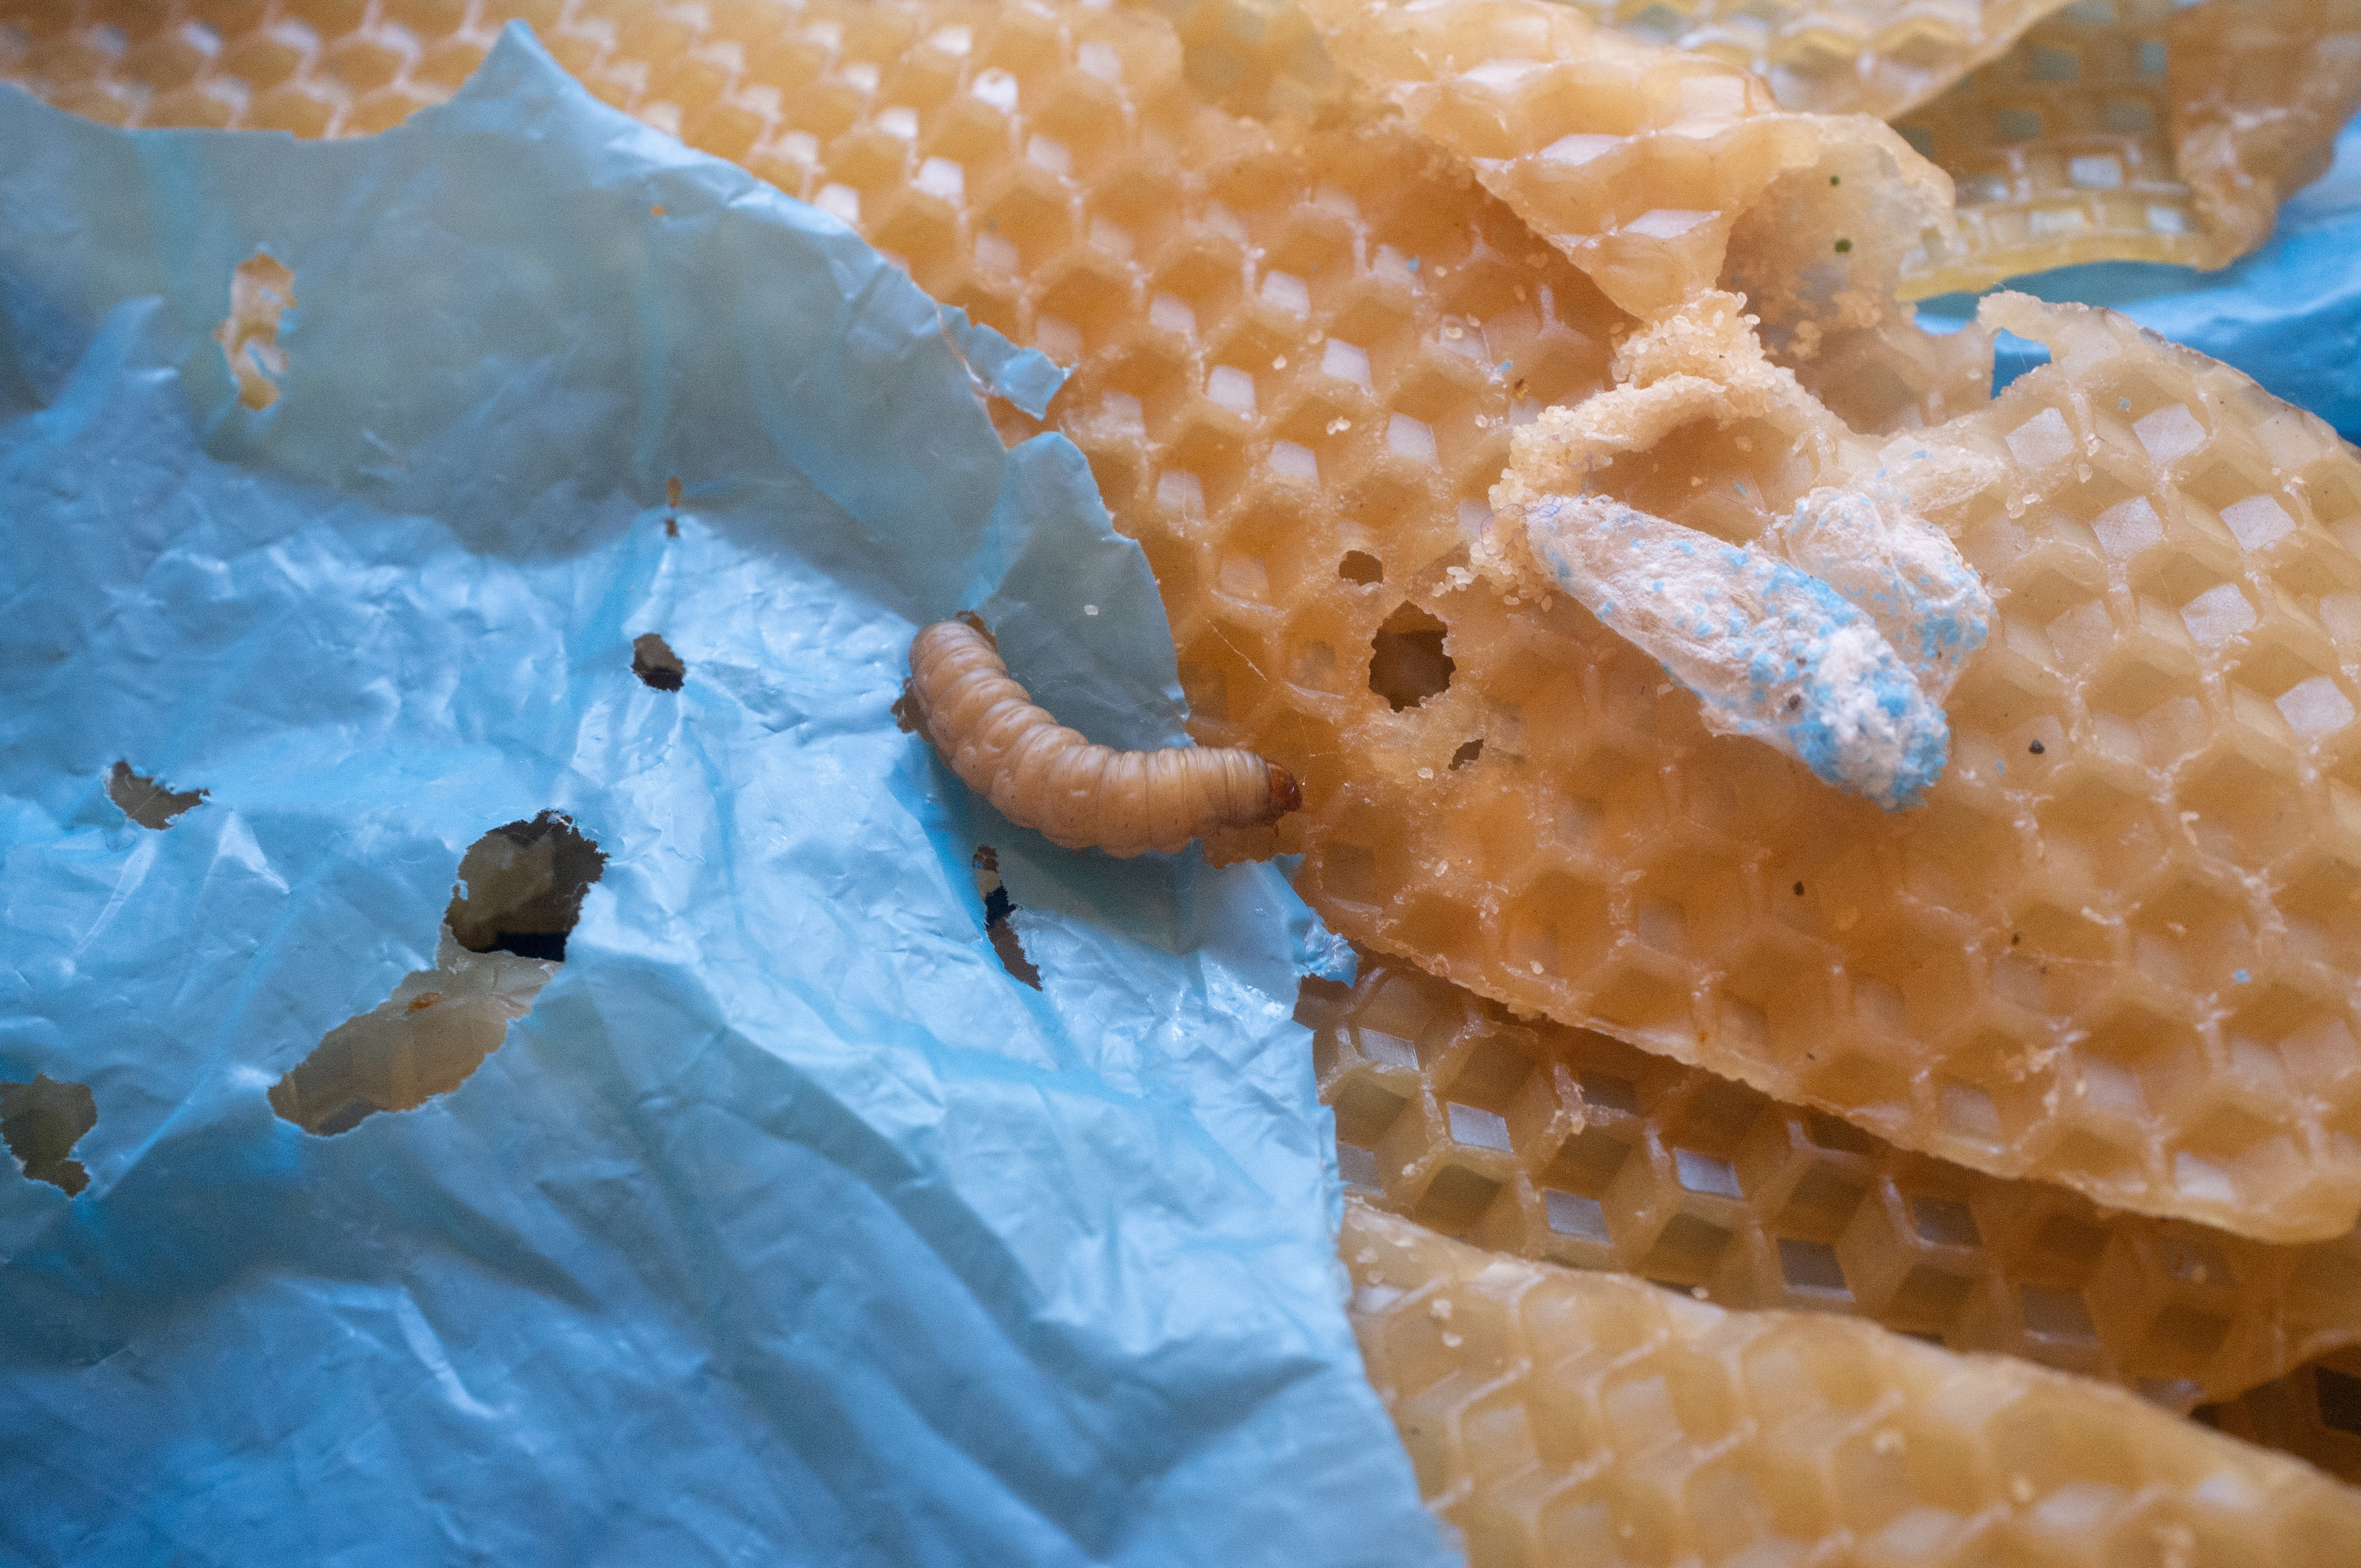 Lowly wax worm's saliva may boost fight against plastic pollution